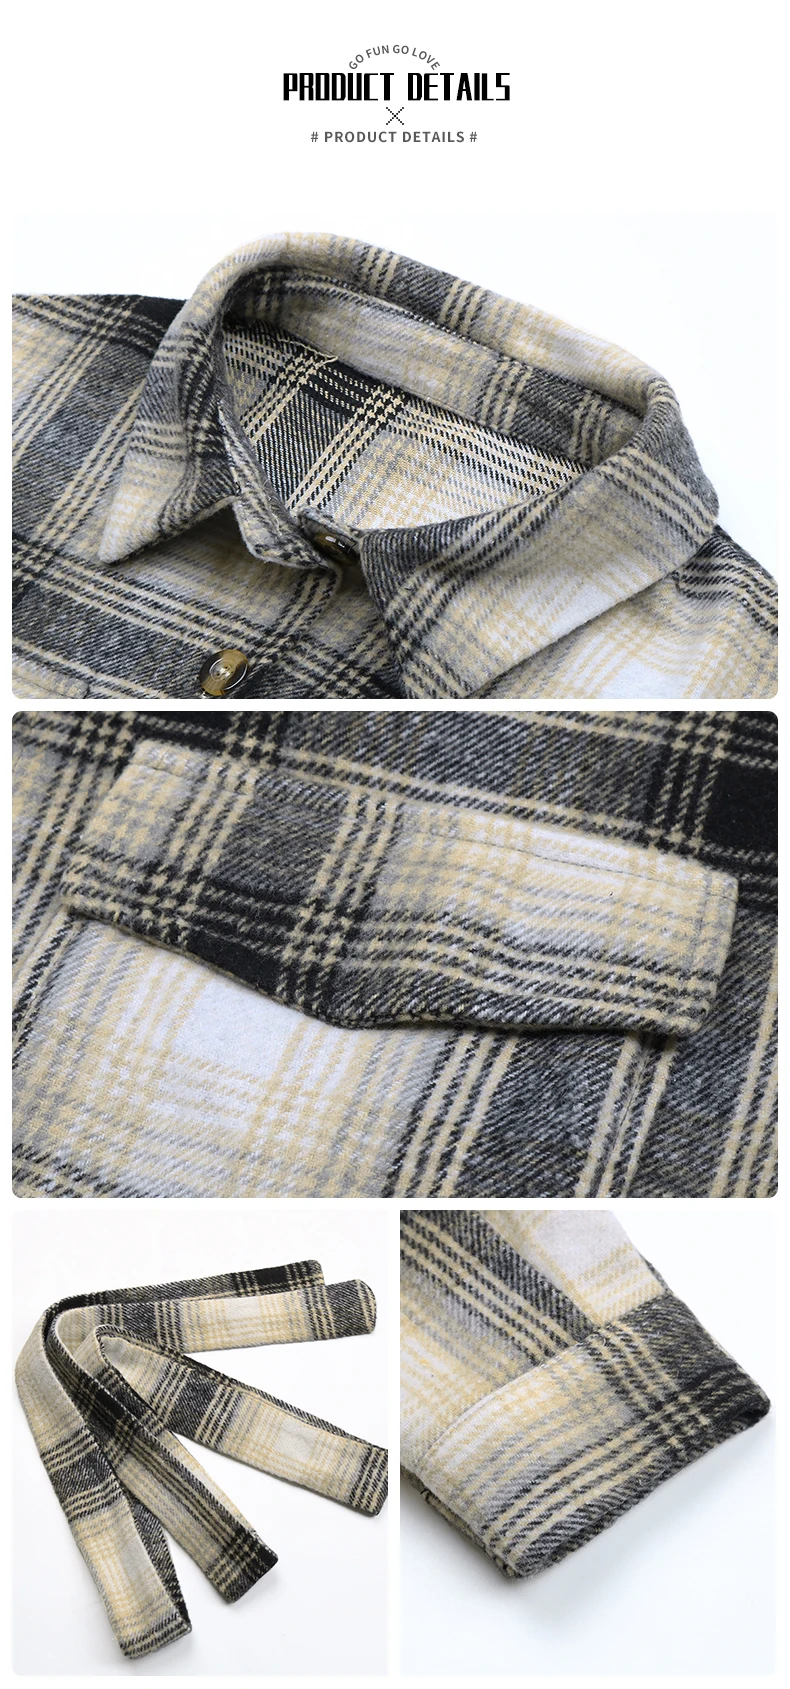 JIM & NORA Women Thick Plaid Shirts Winter Warm Blouses Tops New Casual Lapel Collar Shirt Jacket Female Clothes Coat Outwear